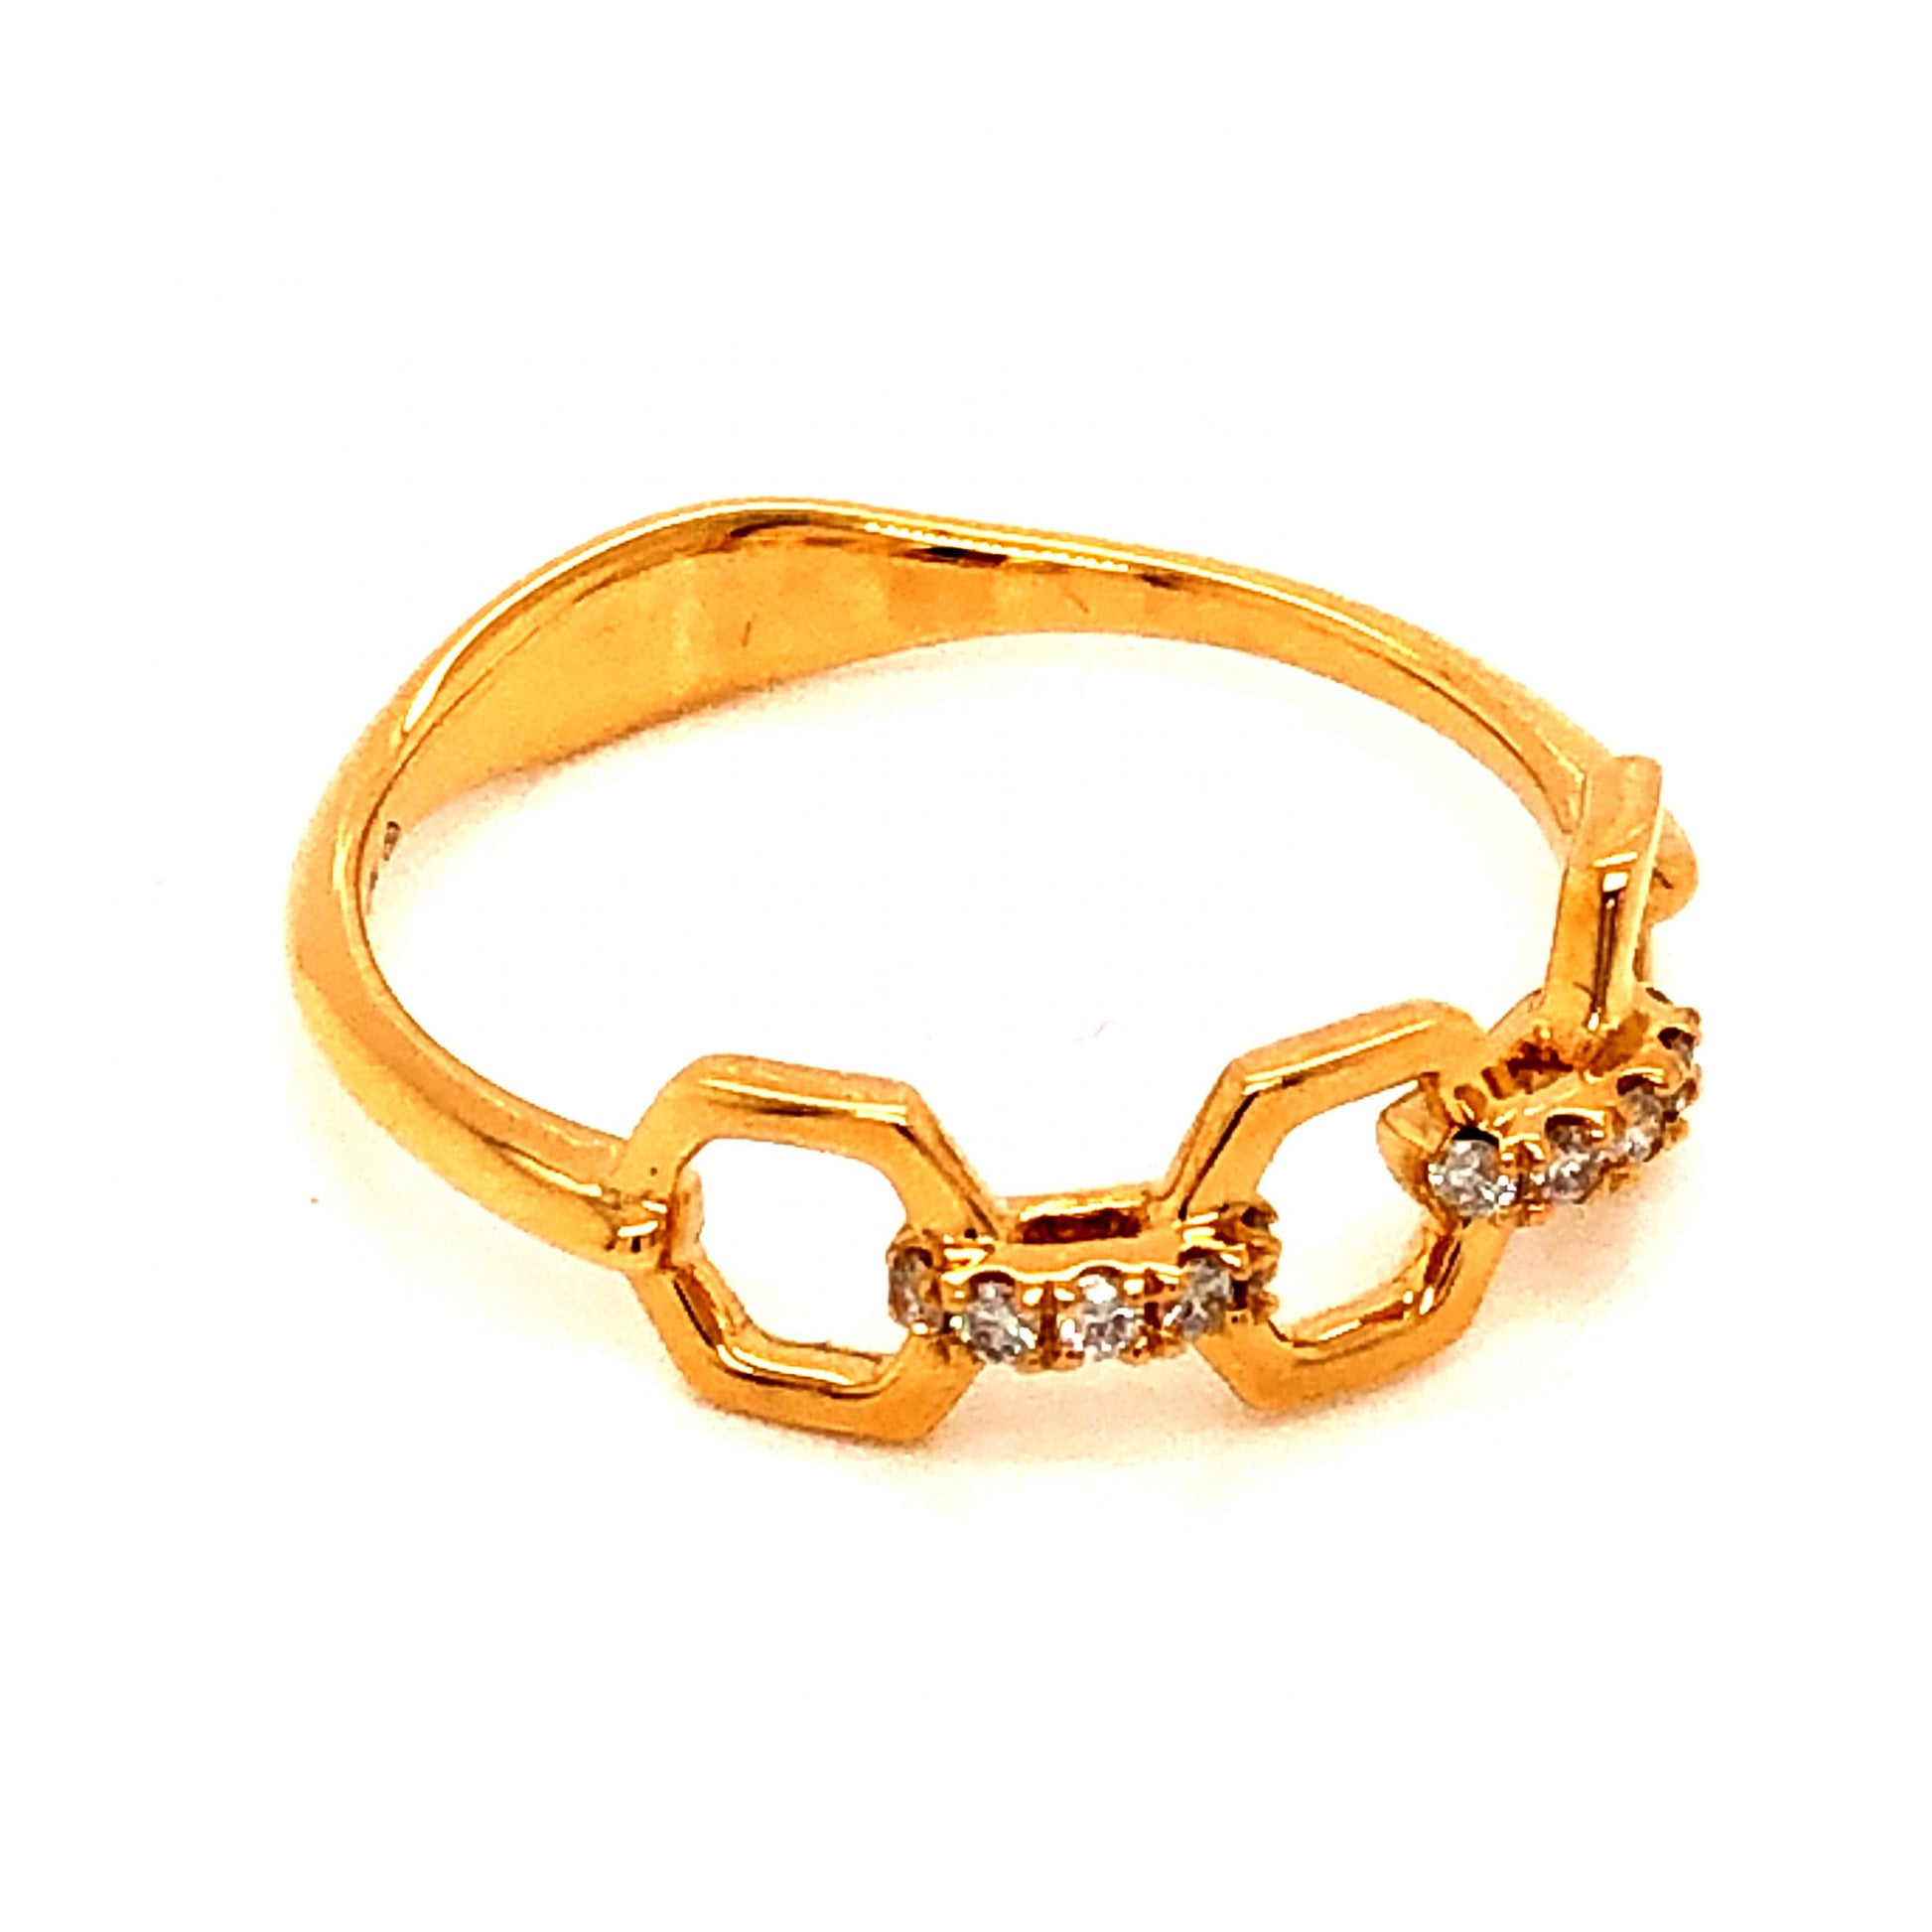 .08 Diamond Link Stacking Band in 18k Yellow GoldComposition: PlatinumRing Size: 6.5Total Diamond Weight: .08 ctTotal Gram Weight: 2.0 gInscription: JHK, 18K, 750 